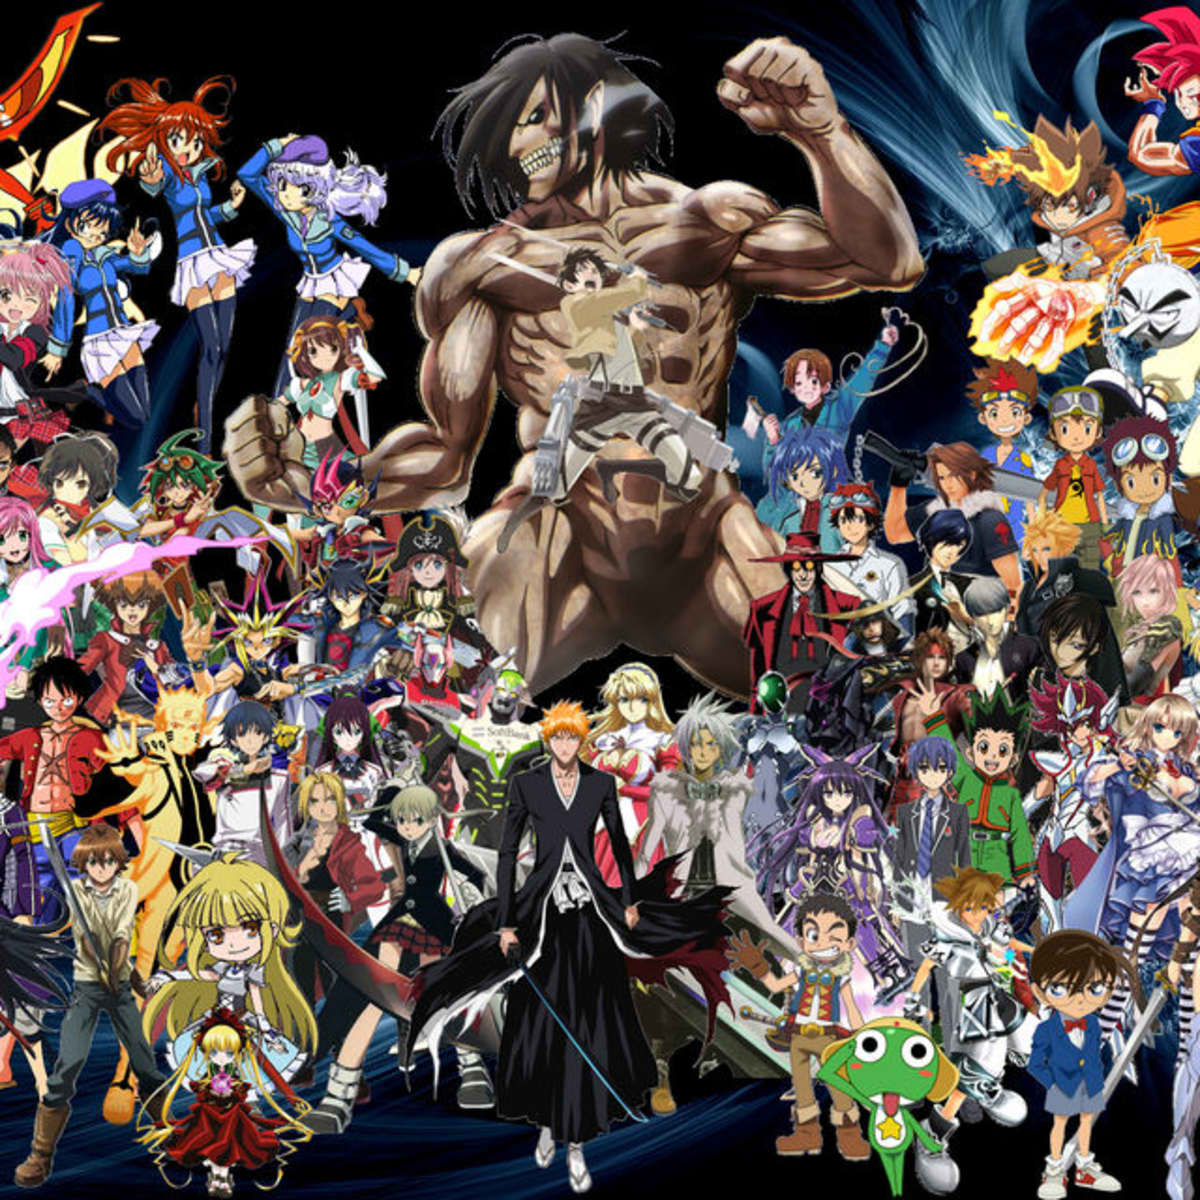 Popular Anime during late 90's and early 2000's - HubPages